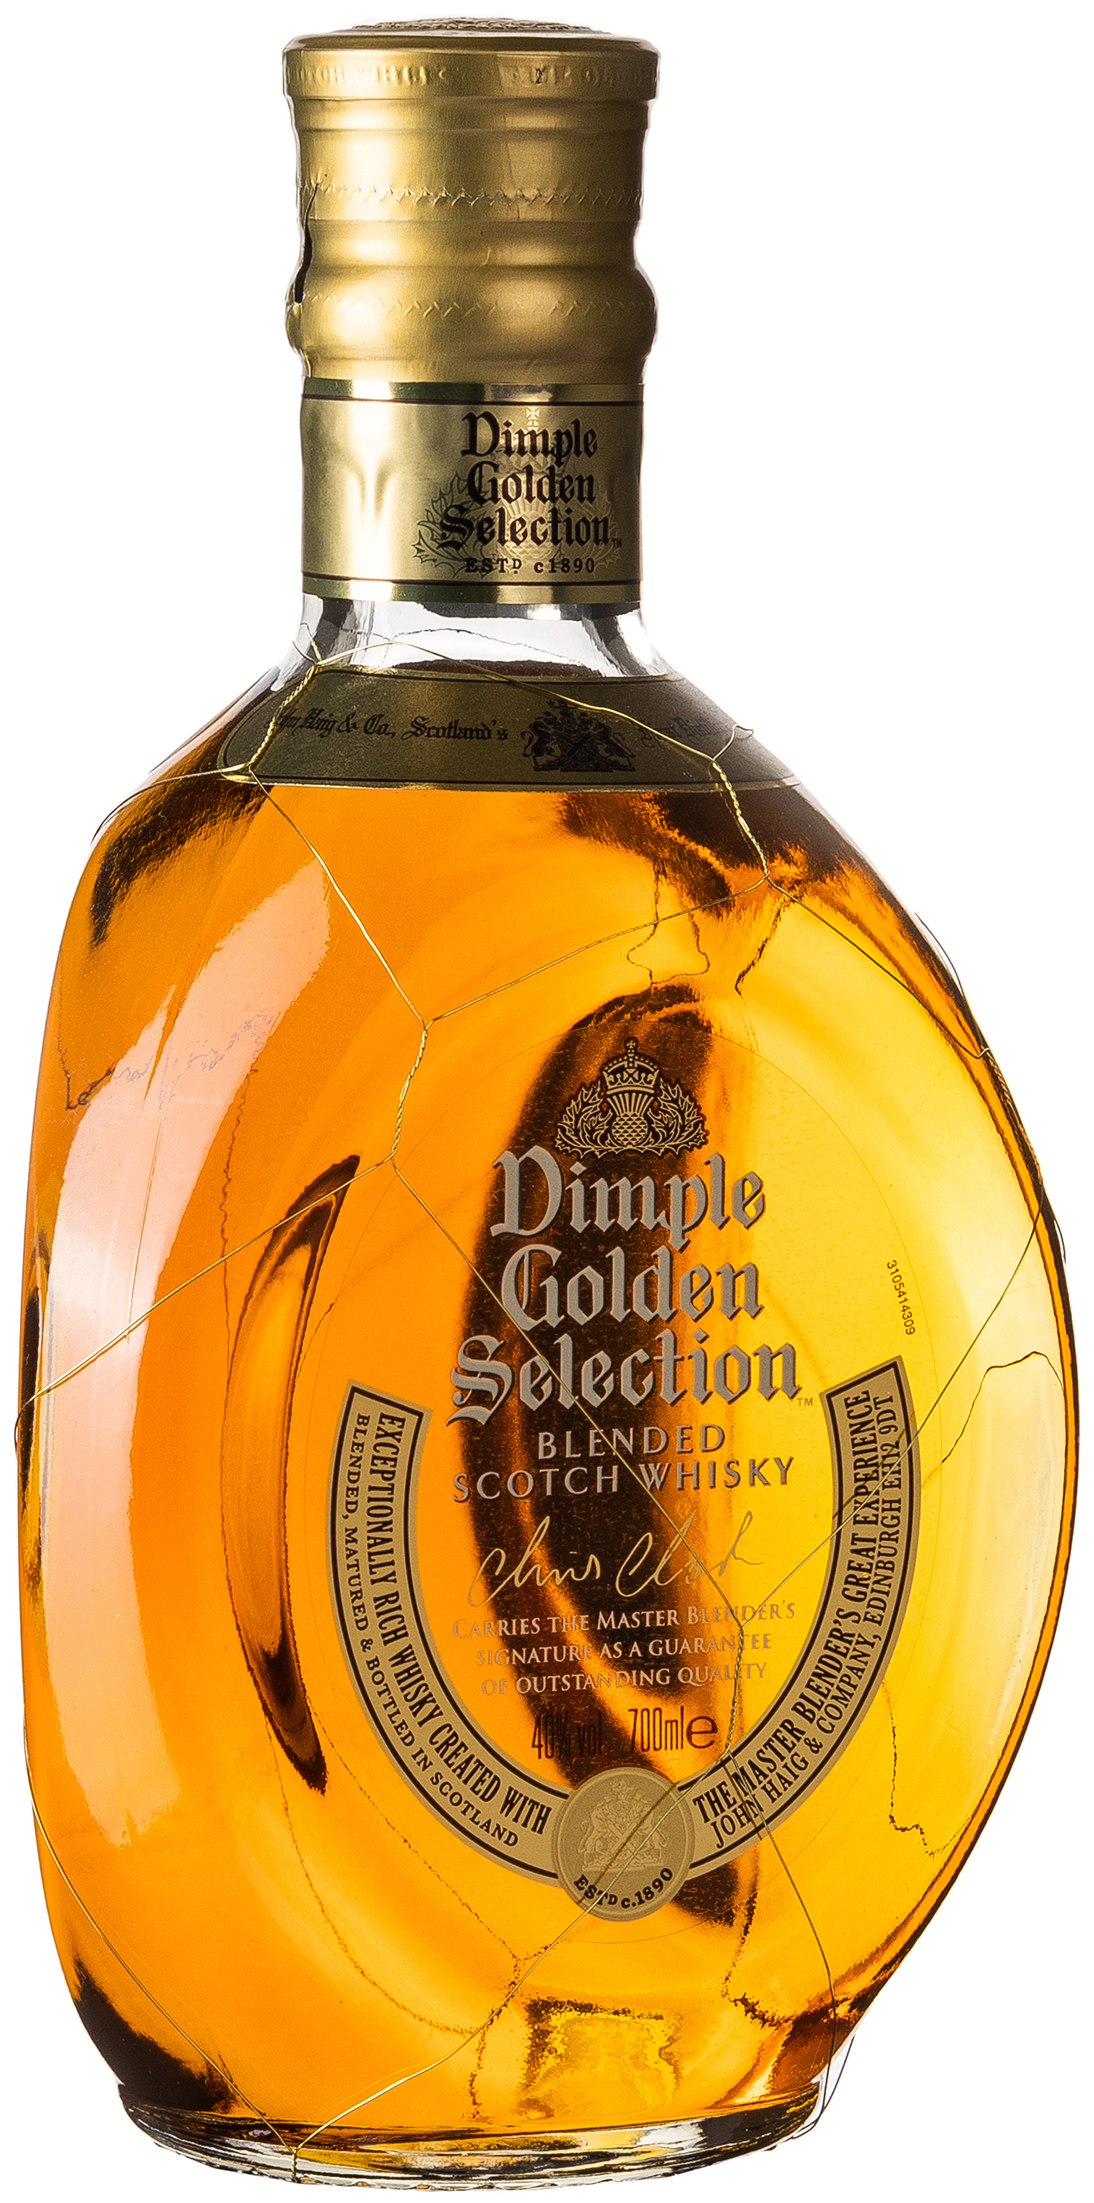 40% GP Dimple 0,7L blended Whisky Gold Selection Scotch